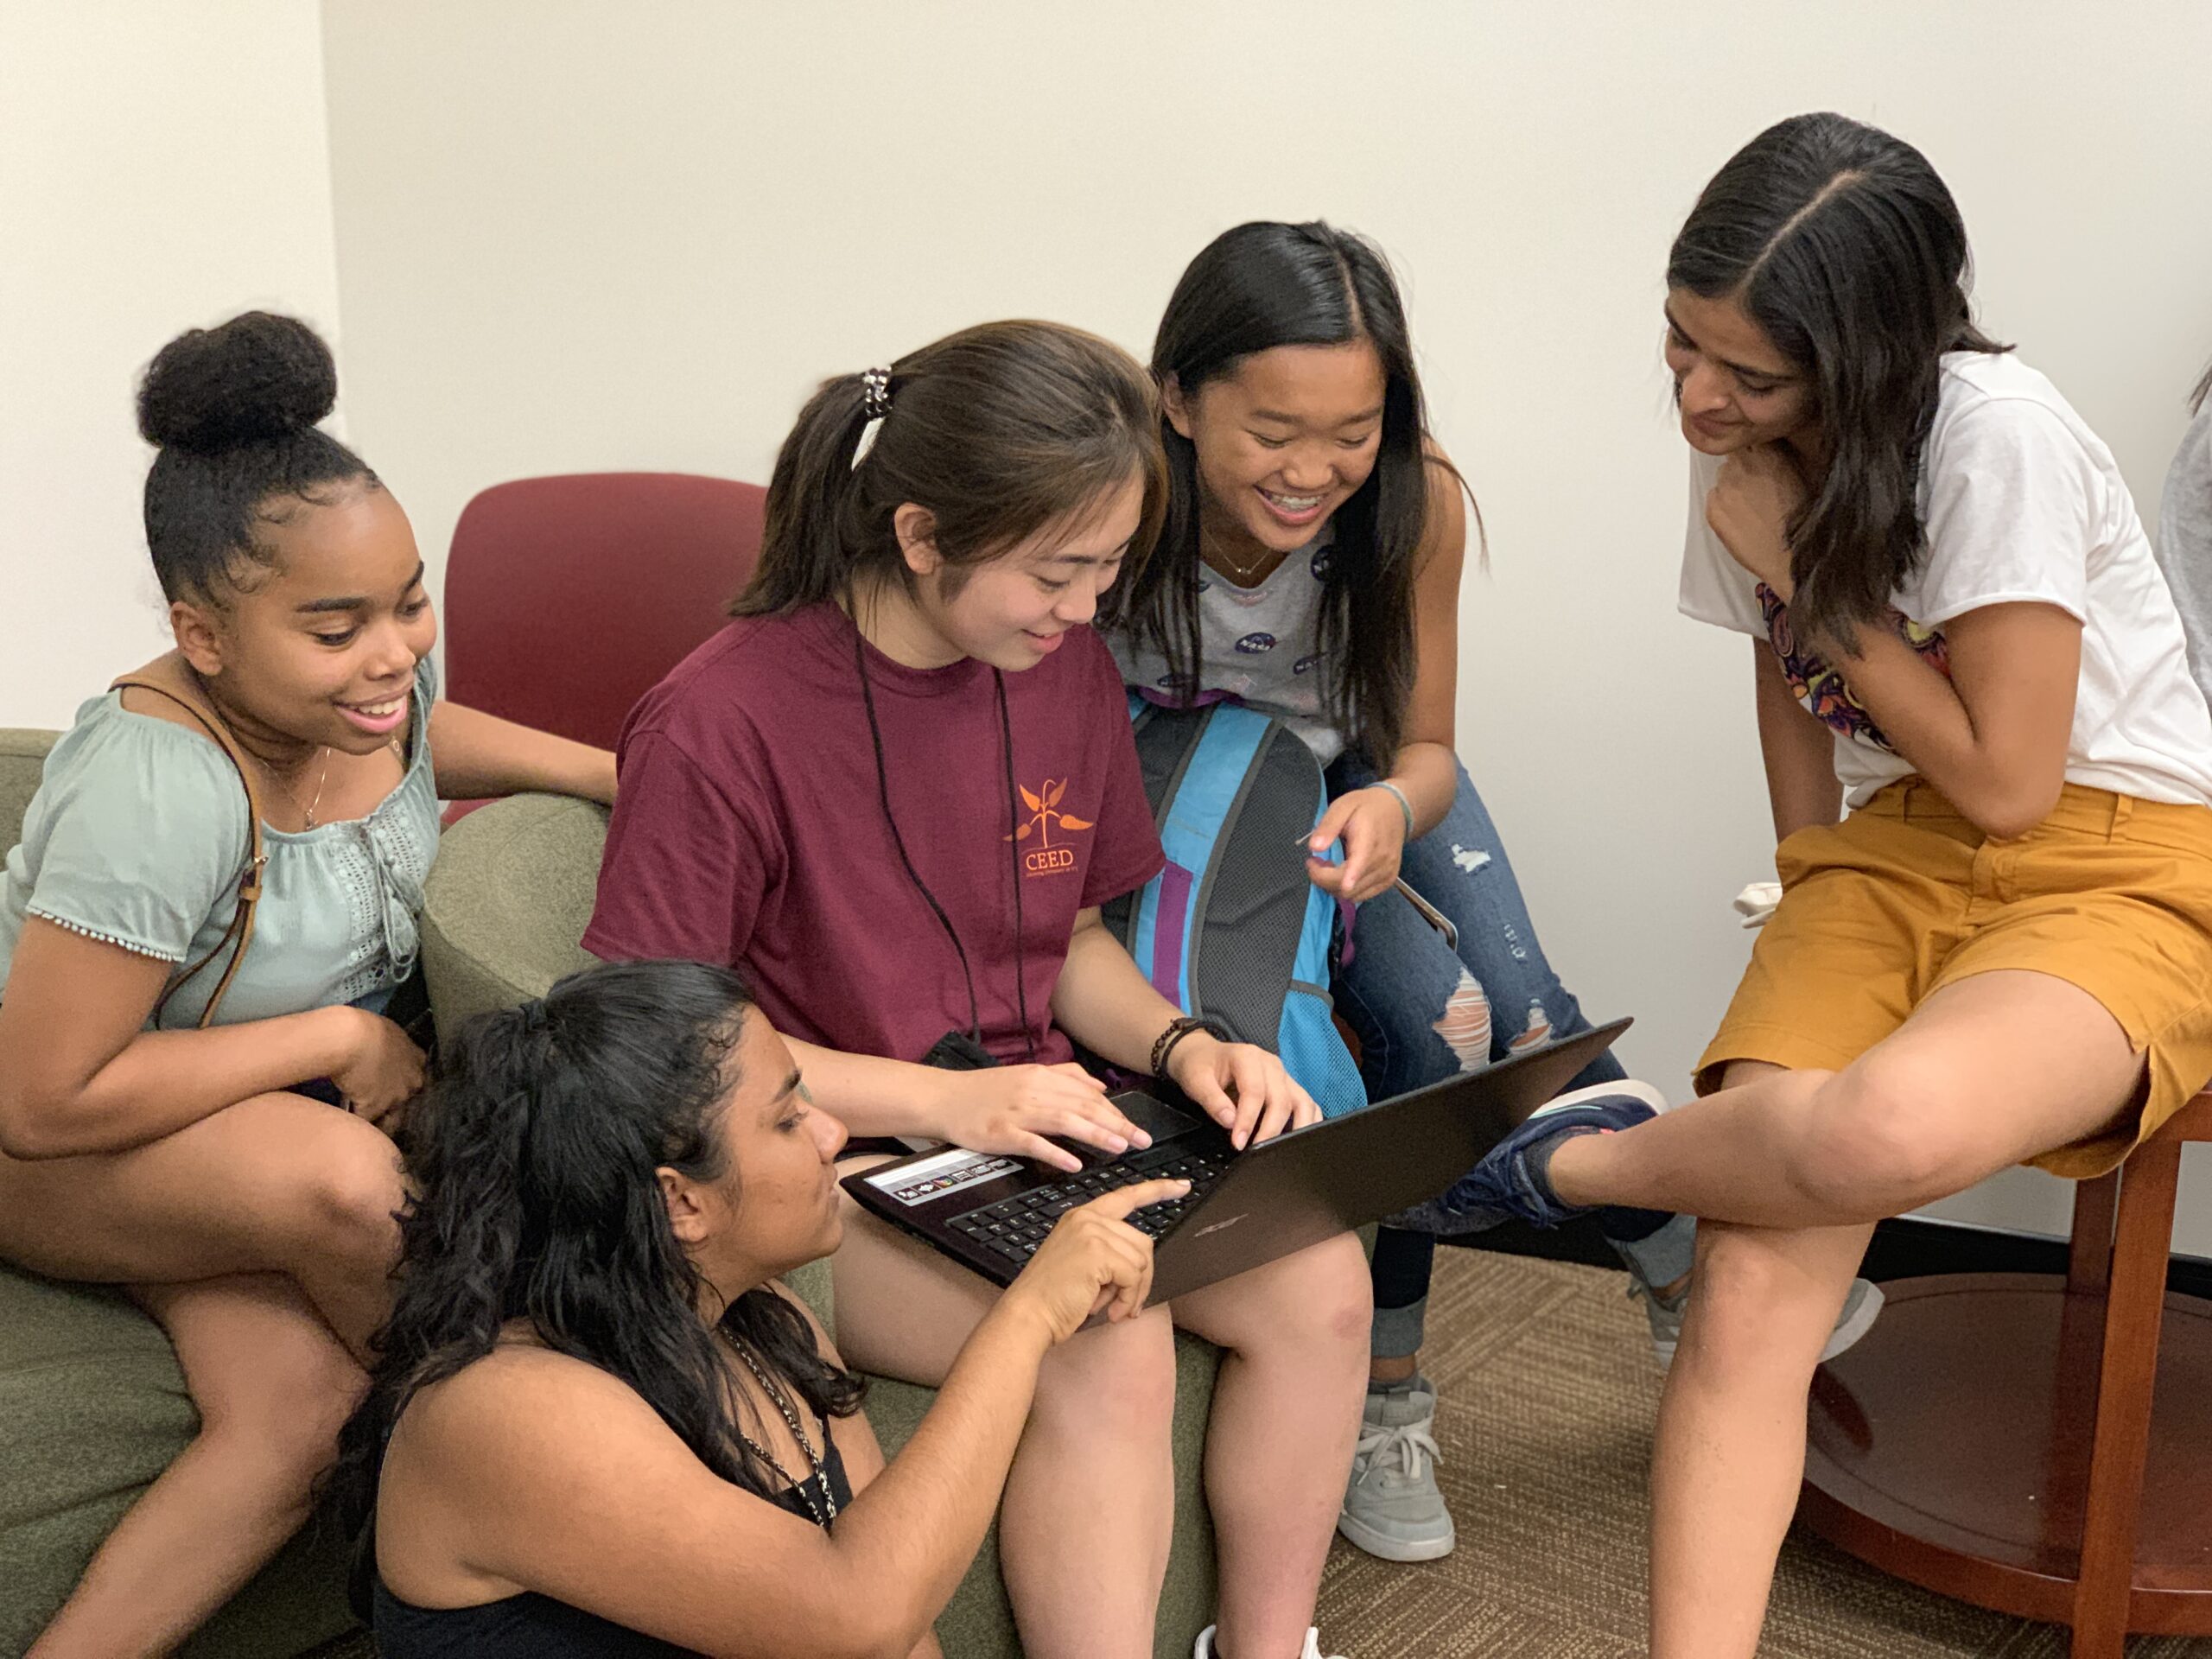 Tech Girls working on a project together